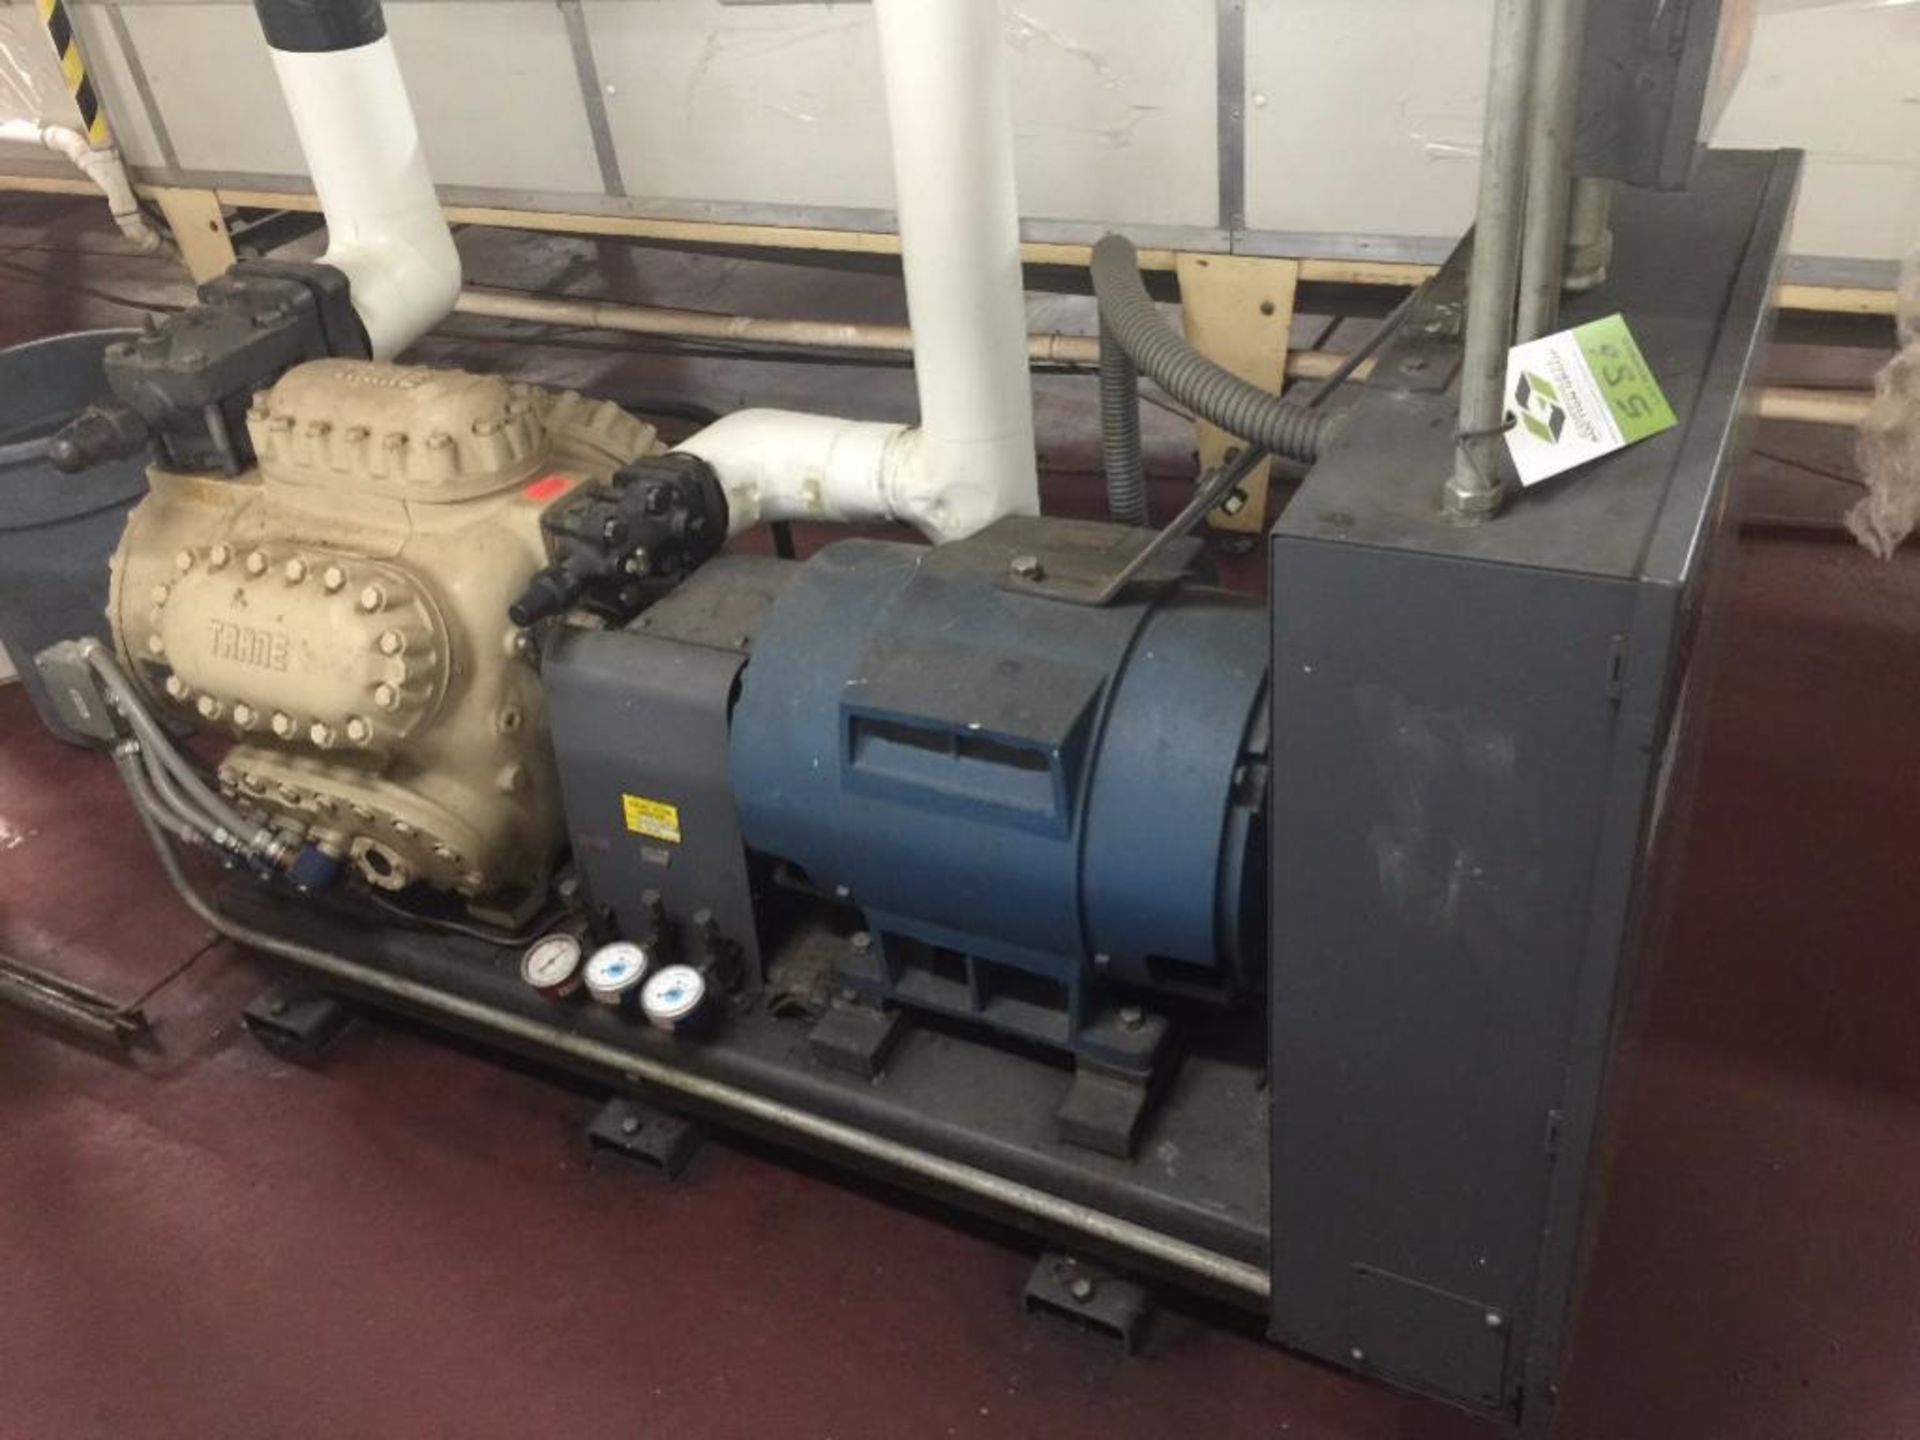 Trane 50 hp freon compressor, Model 3E3R50WN, SN 46934, reciprocating 10 cylinder, freon recovered a